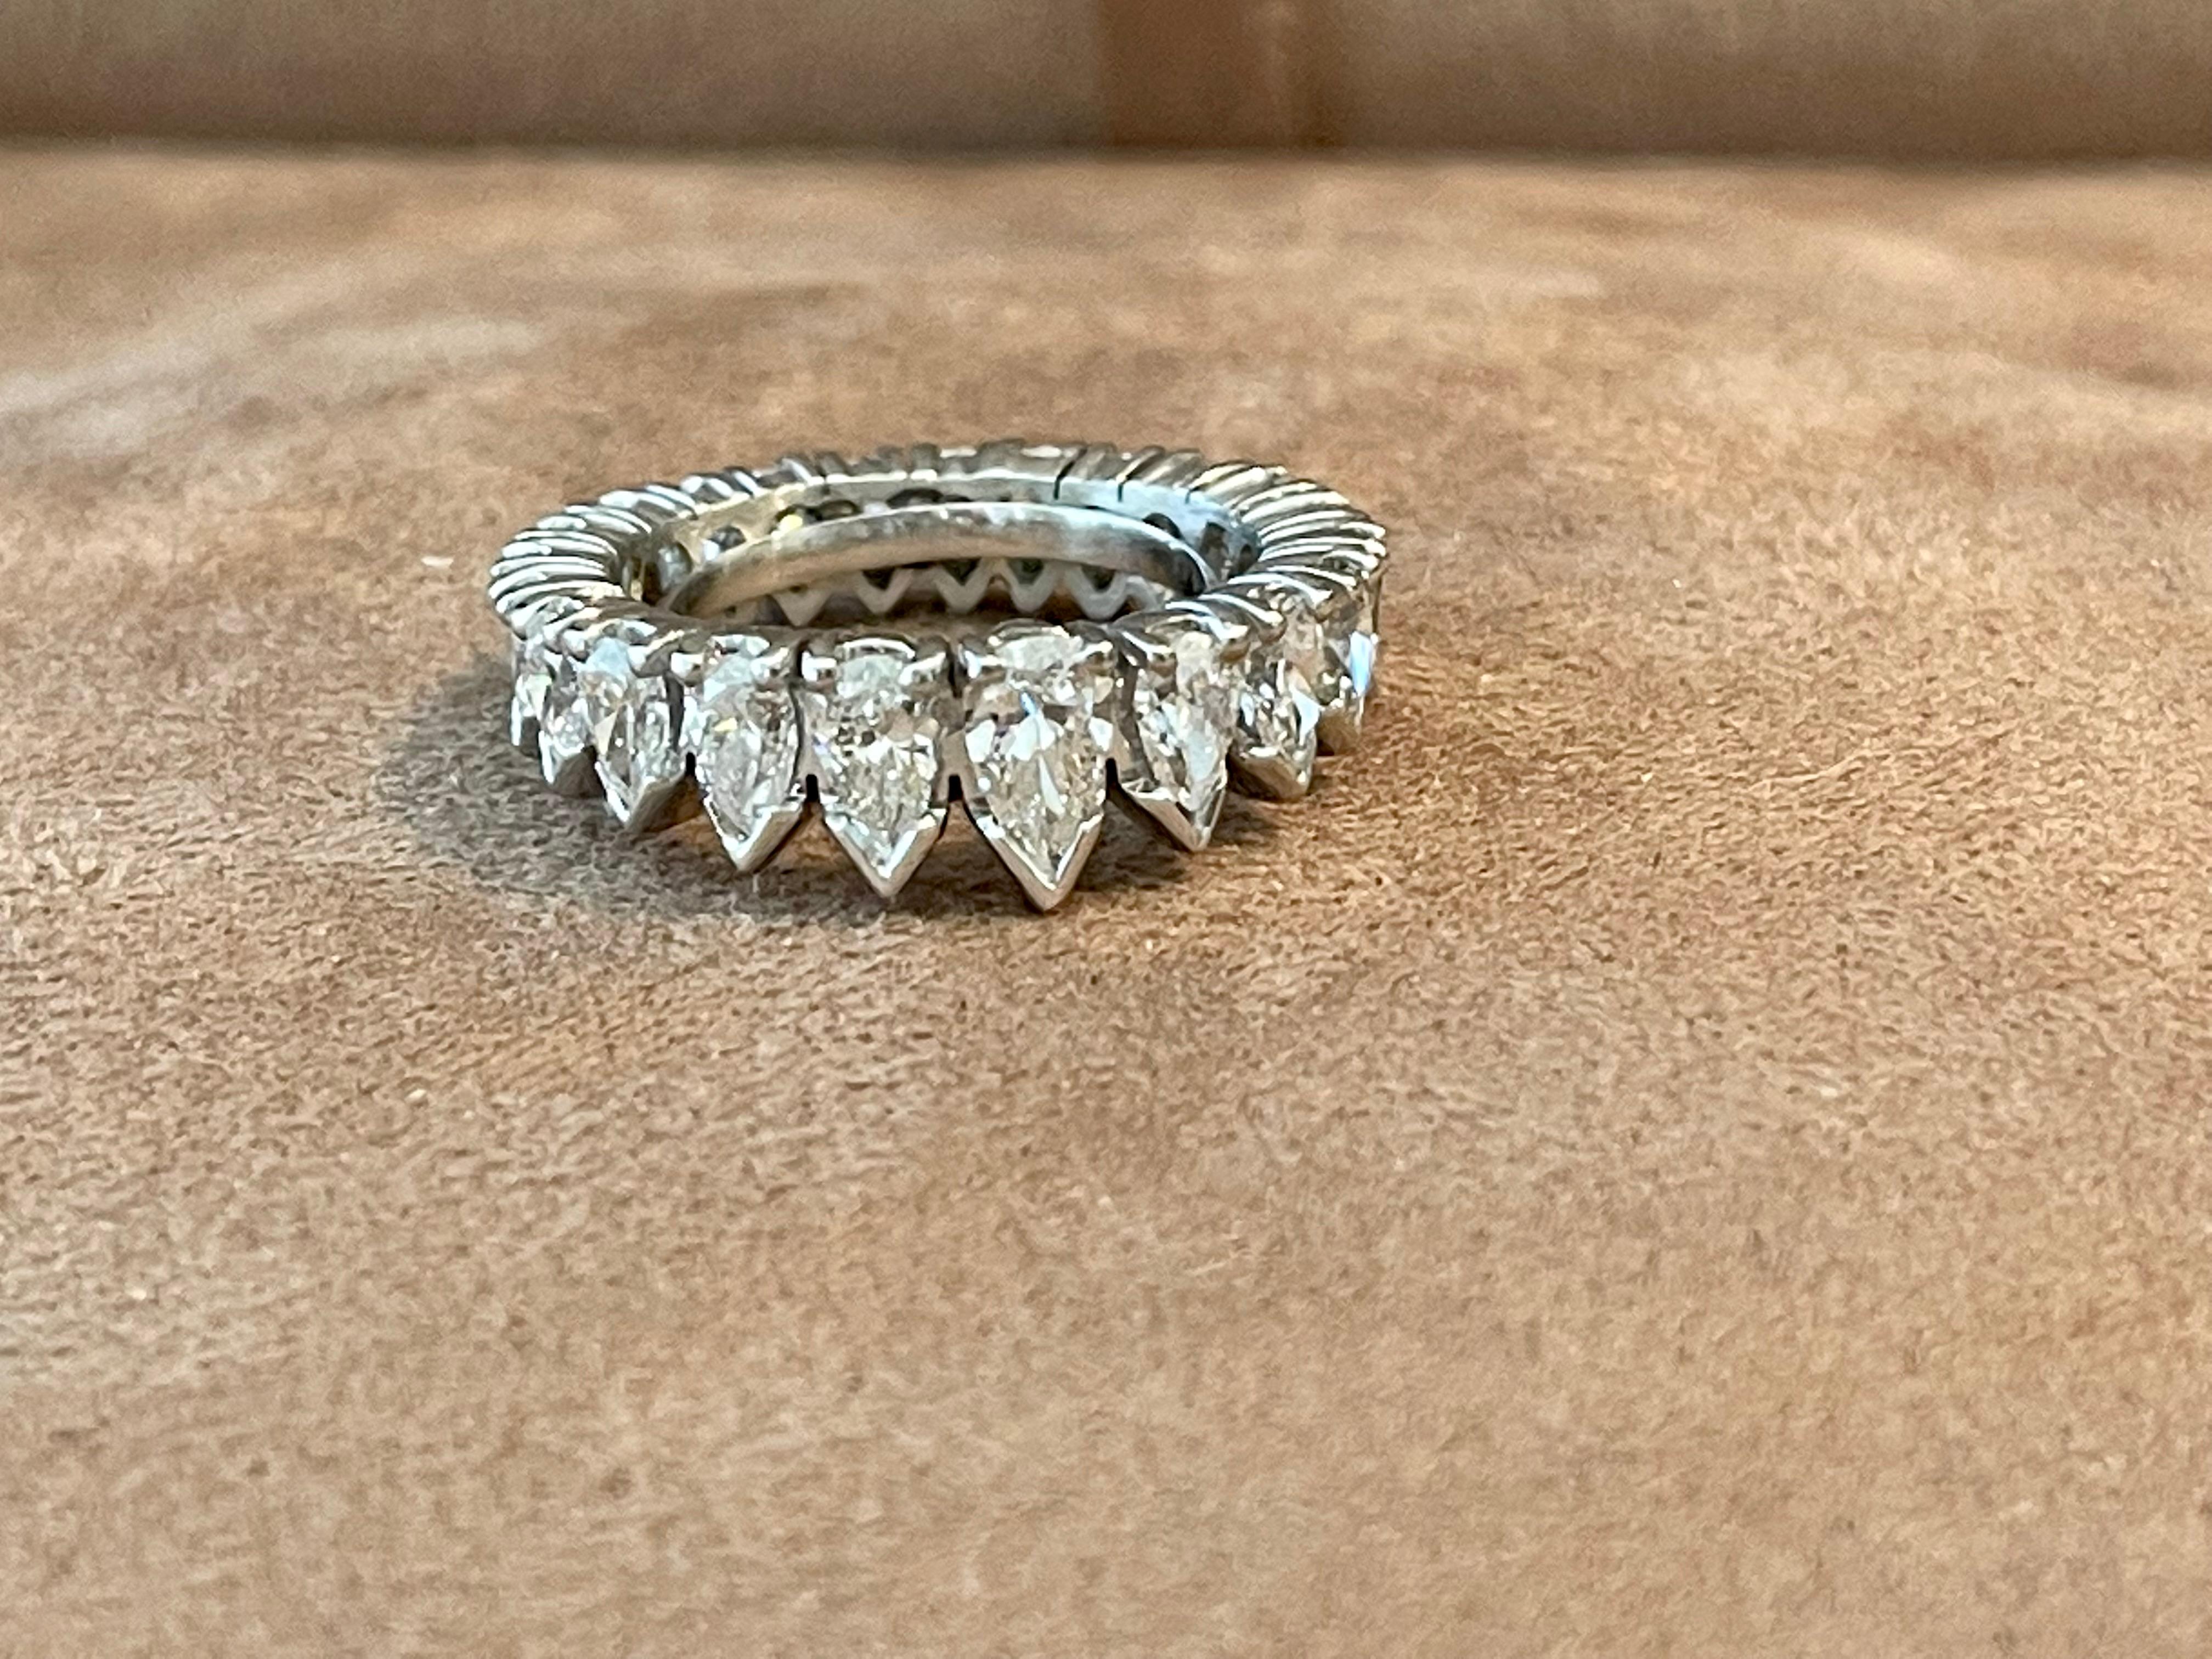 This timeless Platinum eternity band features 24 pear shape Diamonds weighing approximately 4.20 ct, H color, si clarity.
The ring is currently size 52/12( american Ring size 6) but can be resized from a professional goldsmith easily. 
QUESTIONS? 